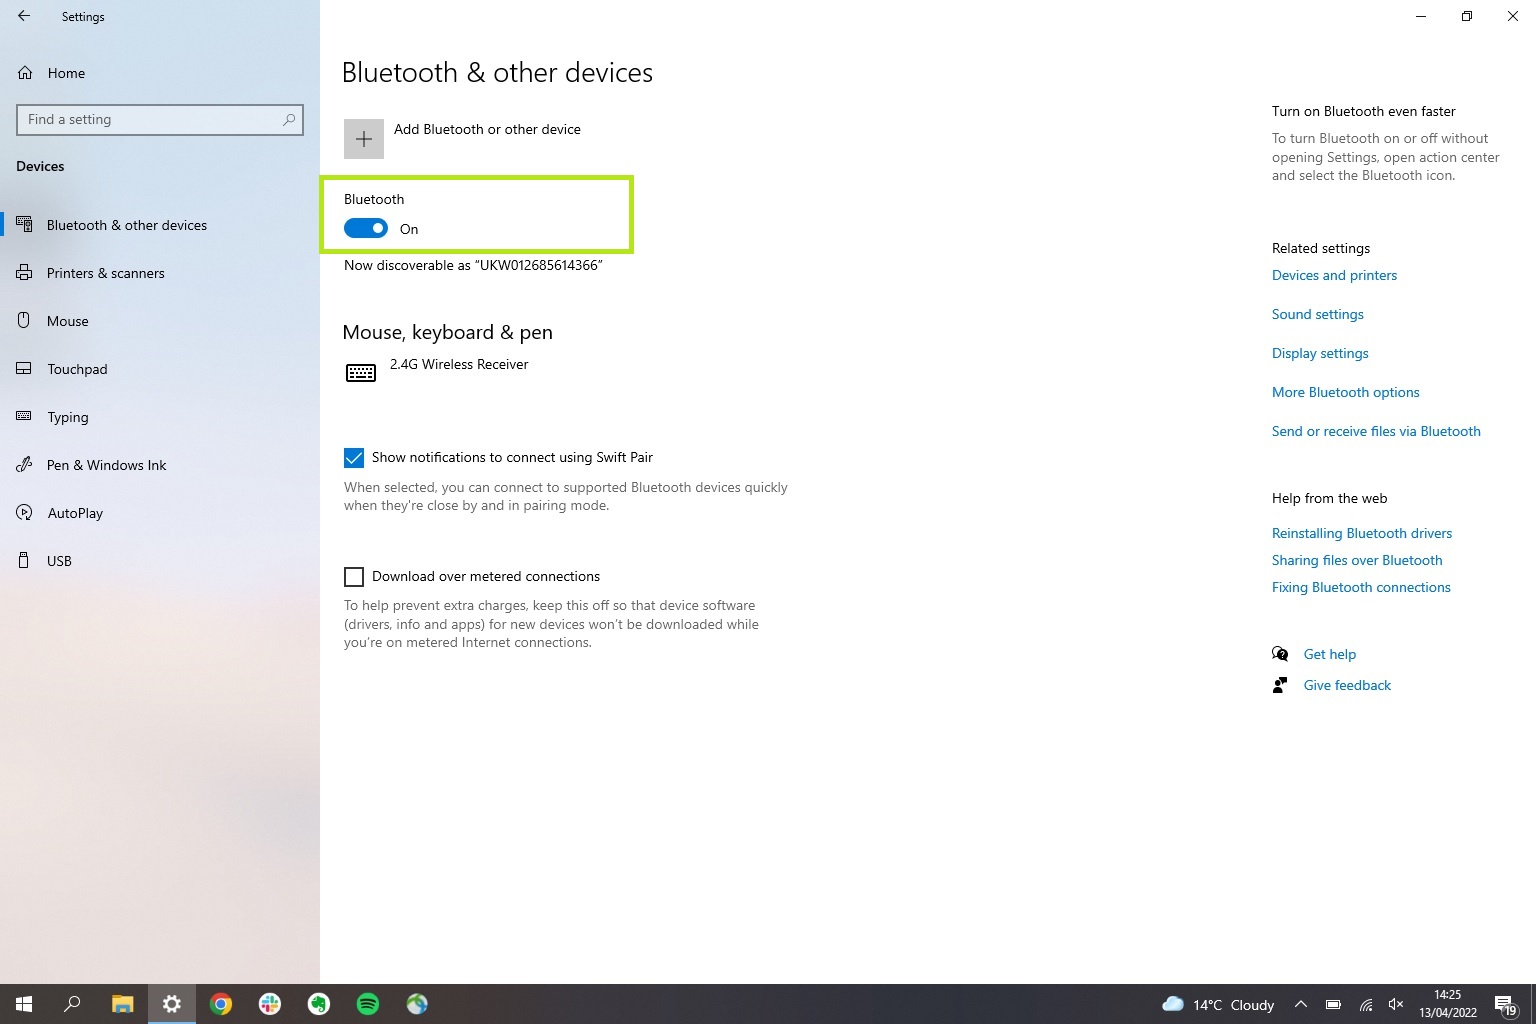 A screenshot showing the Windows 10 Bluetooth menu representing how to connect AirPods to a PC